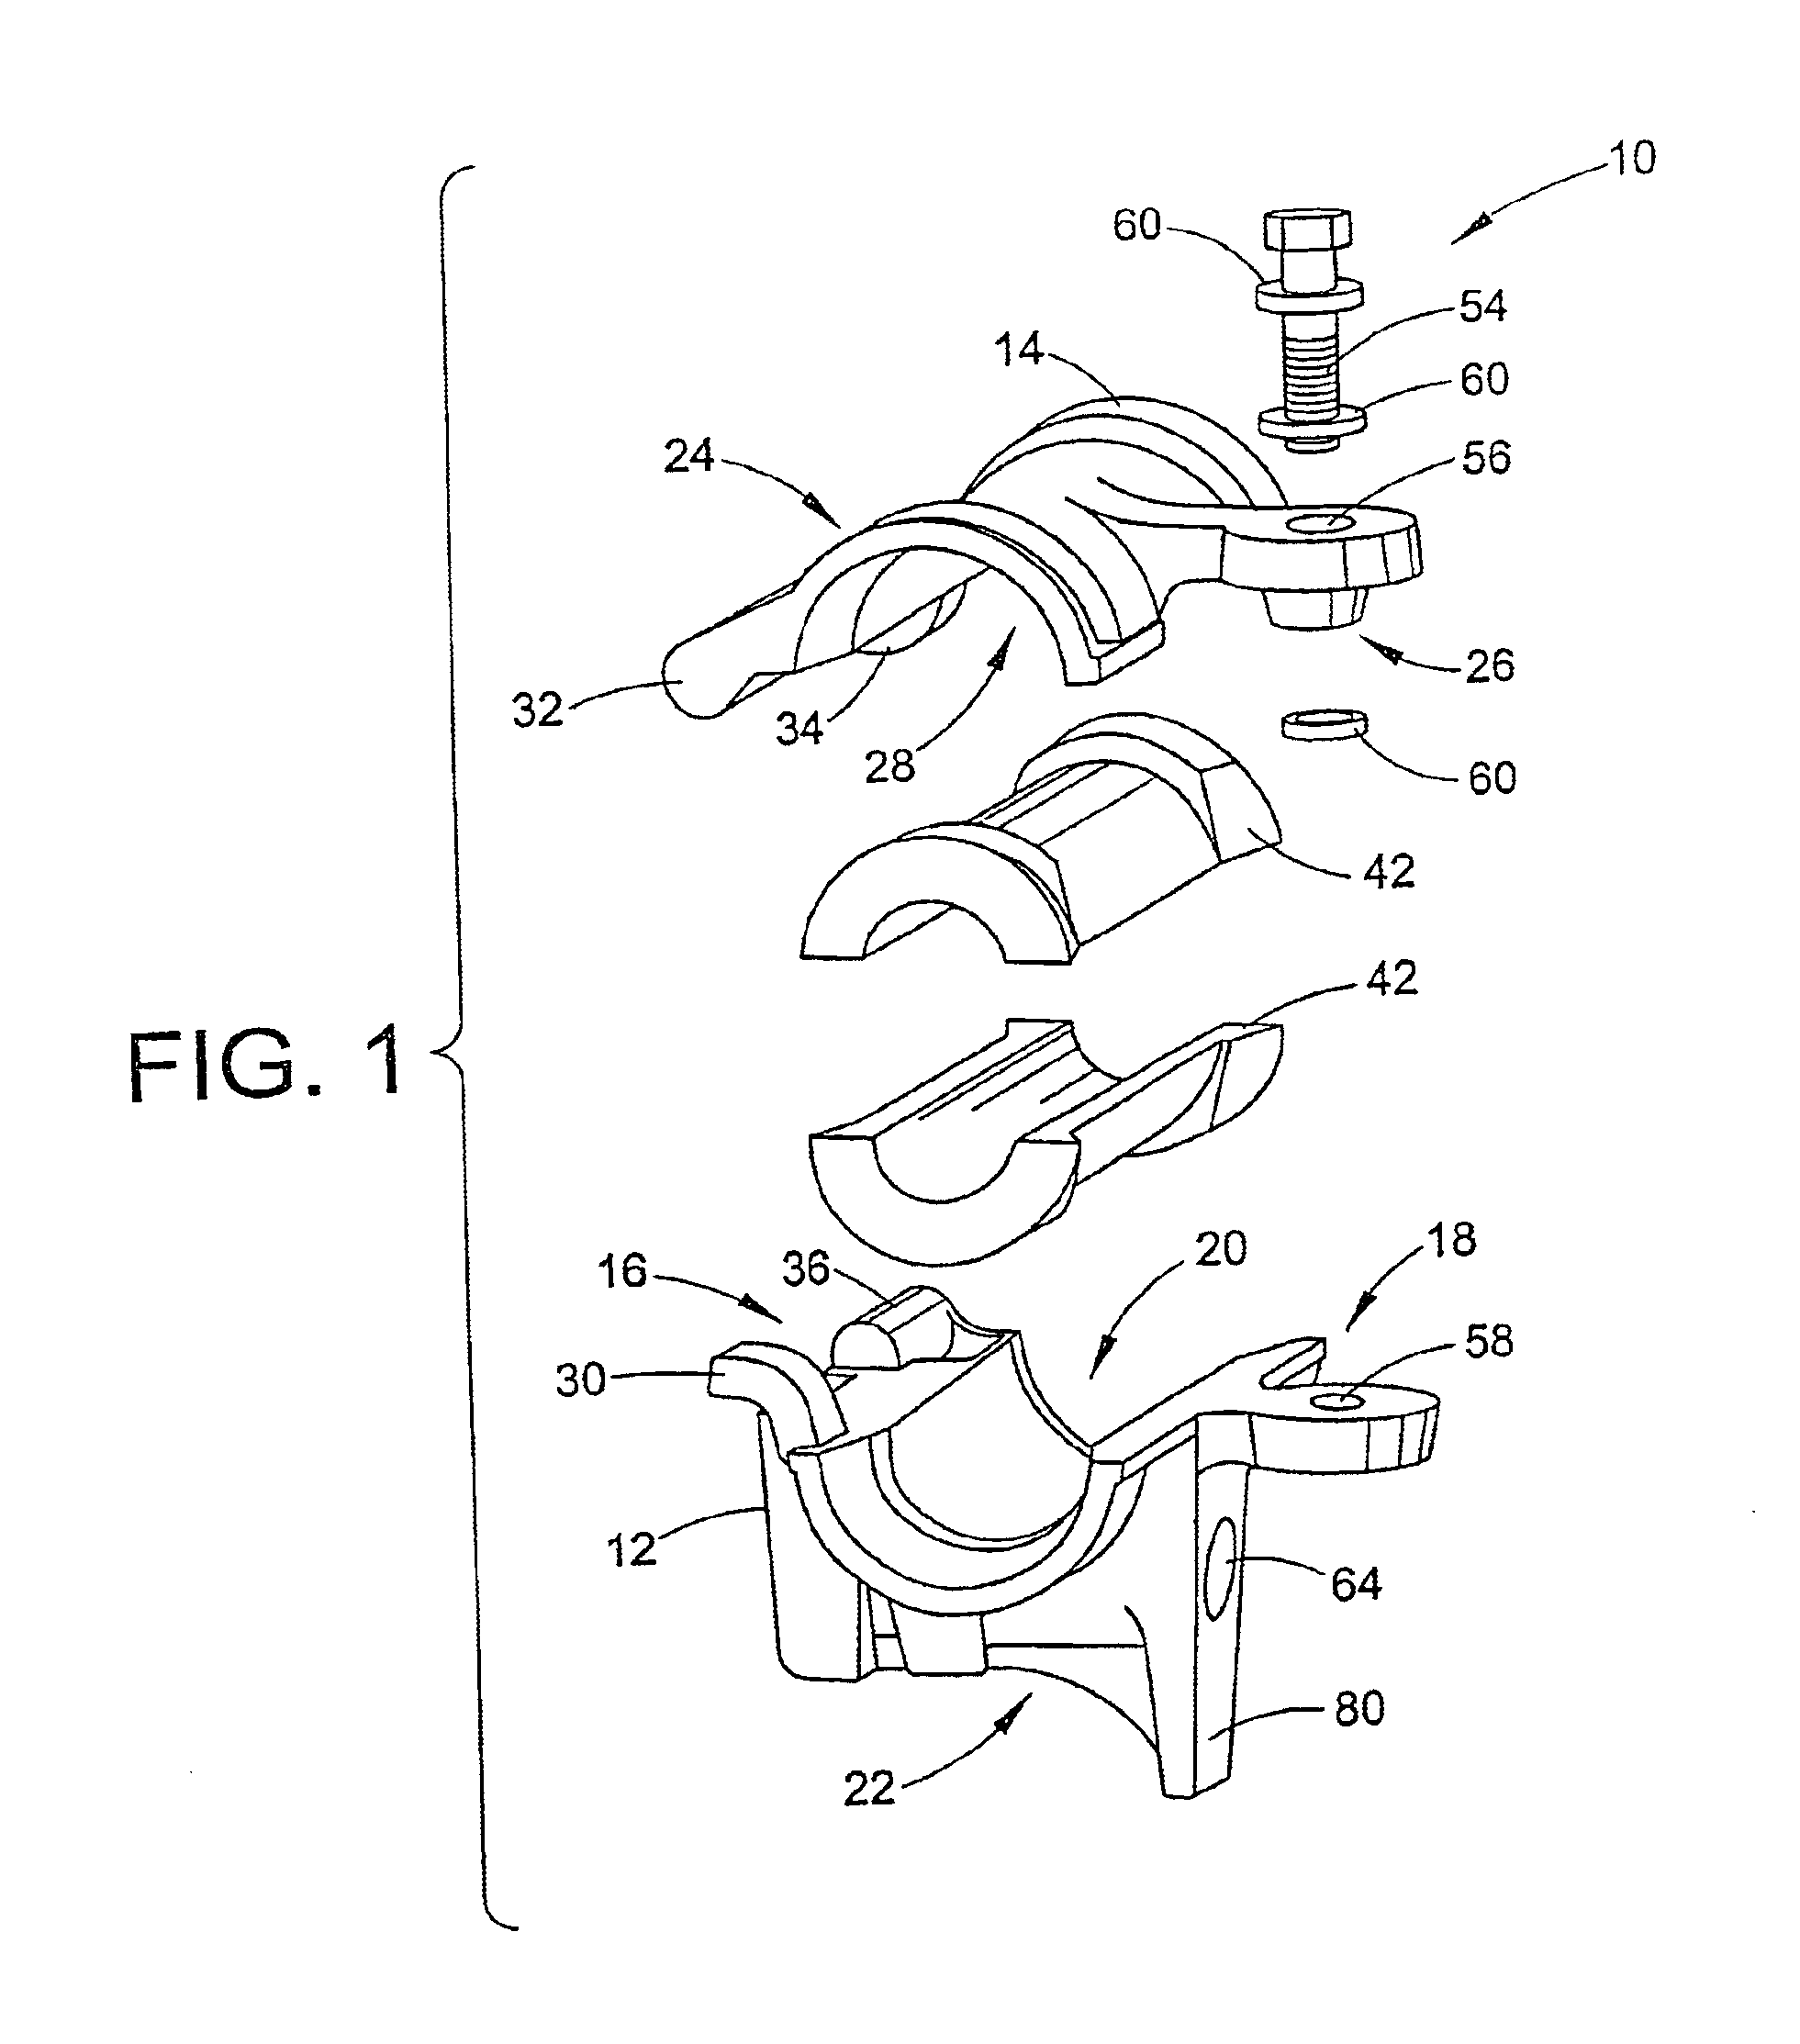 Modular cable support apparatus, method, and system